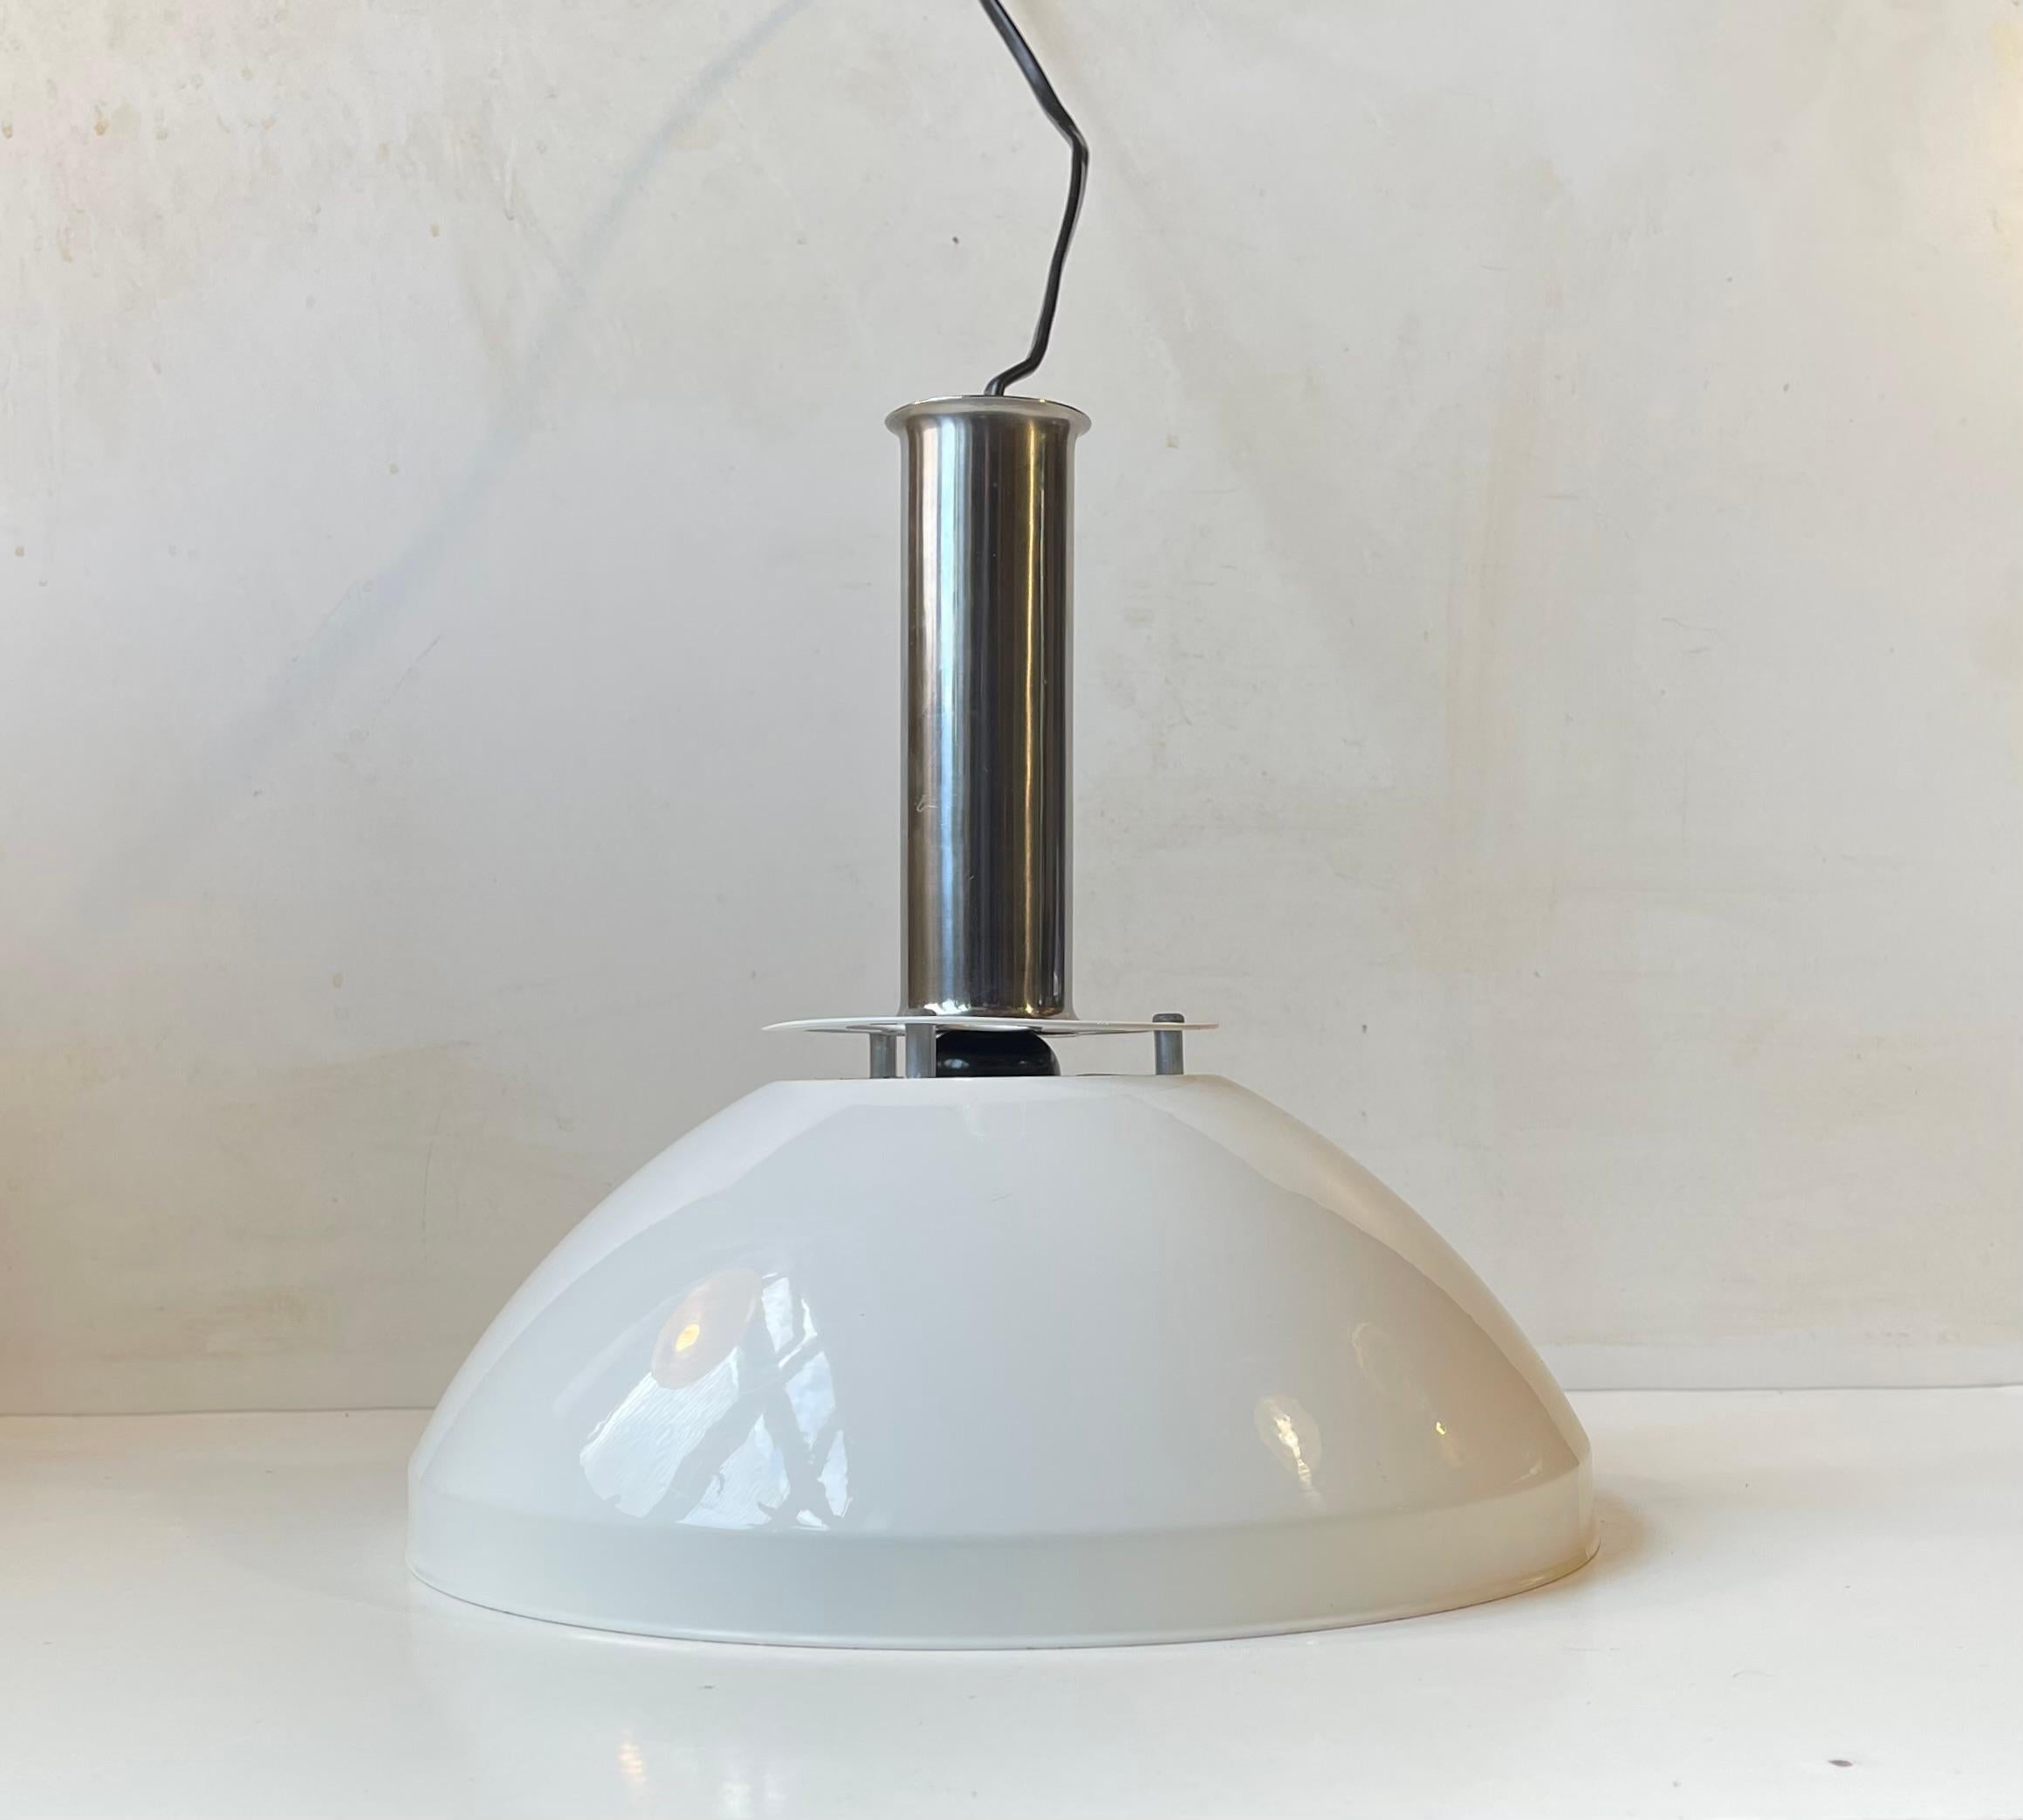 A stylish Italian industrial style hanging lamp in white enameled metal. Its top is made from chrome plated steel. Manufactured in Italy during the 1970s. 

Measurements: H: 27 cm, Diameter: 28 cm. 

3 meters new white cord and bulb installed.